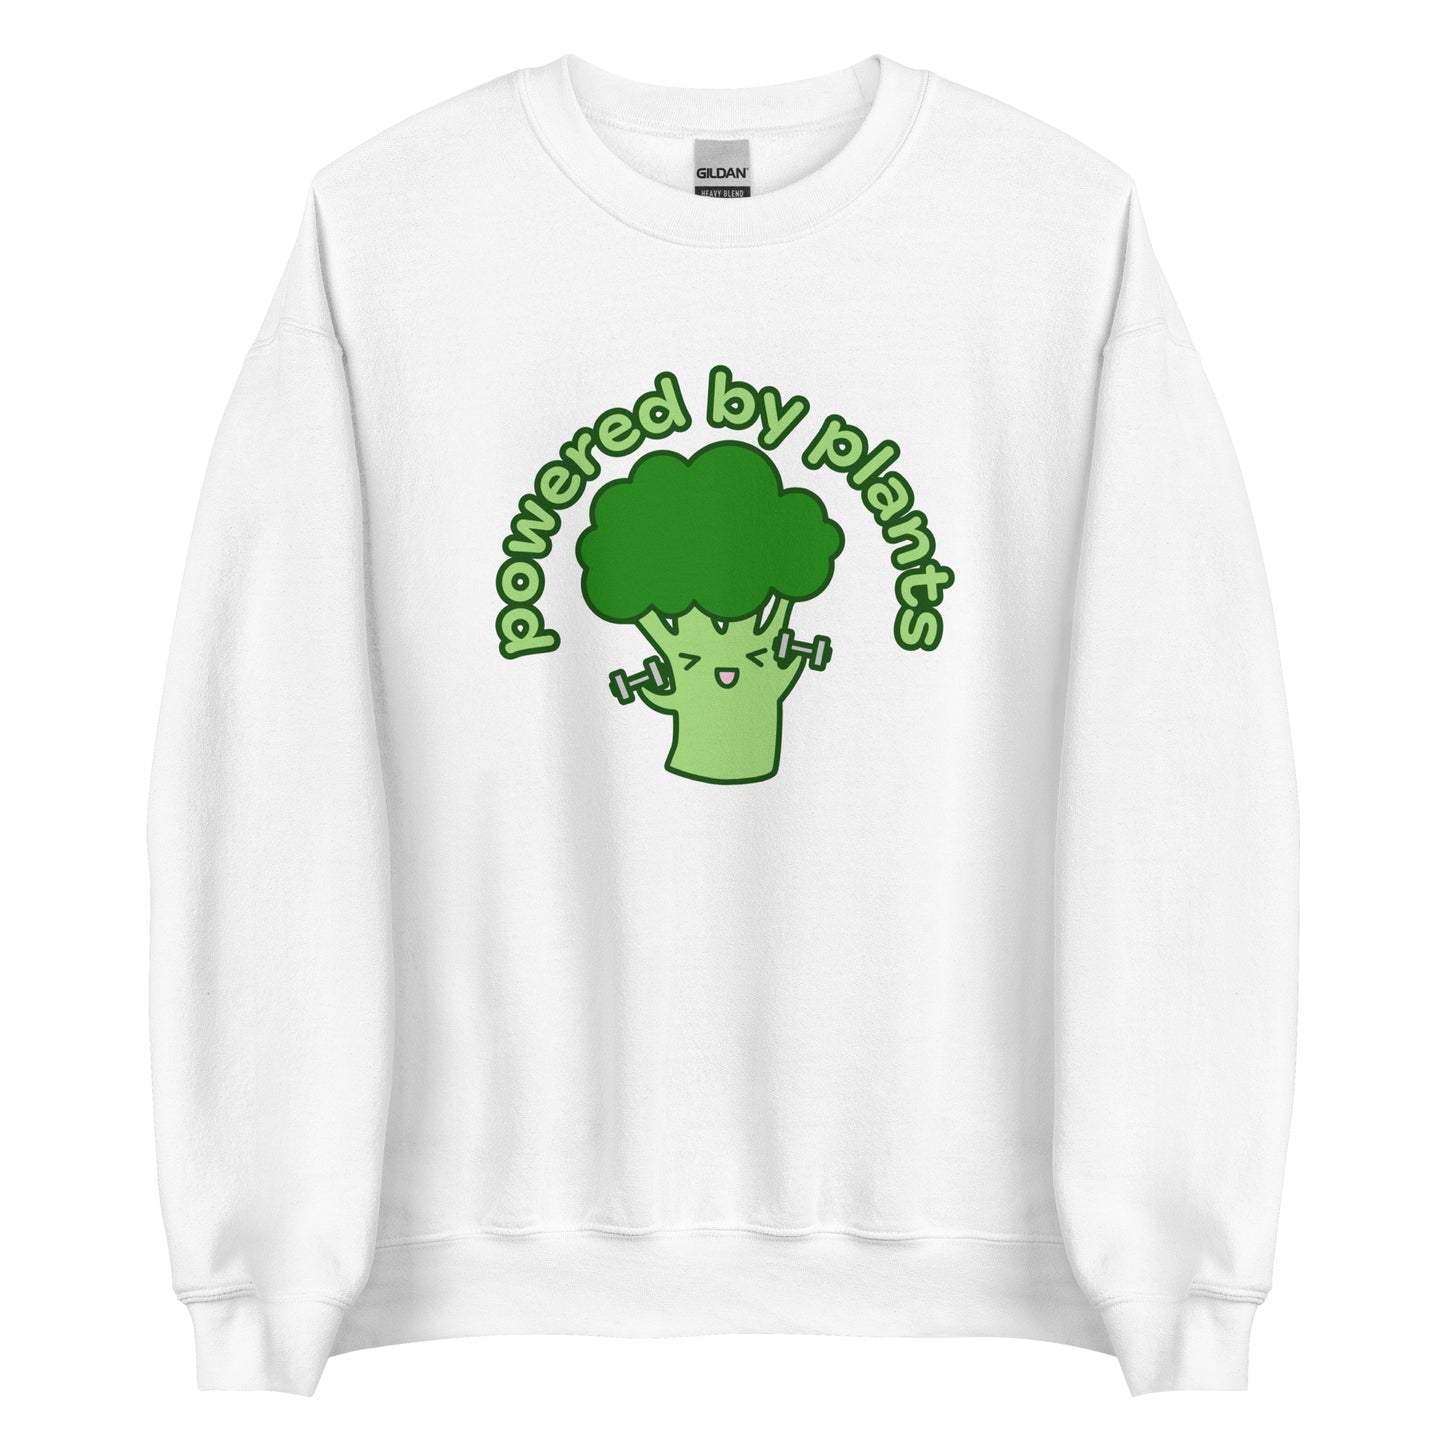 A white crewneck sweatshirt featuring an illustration of a cartoon broccoli character. The broccoli is excitedly lifting weights, and text in an arc above the broccoli reads "powered by plants".